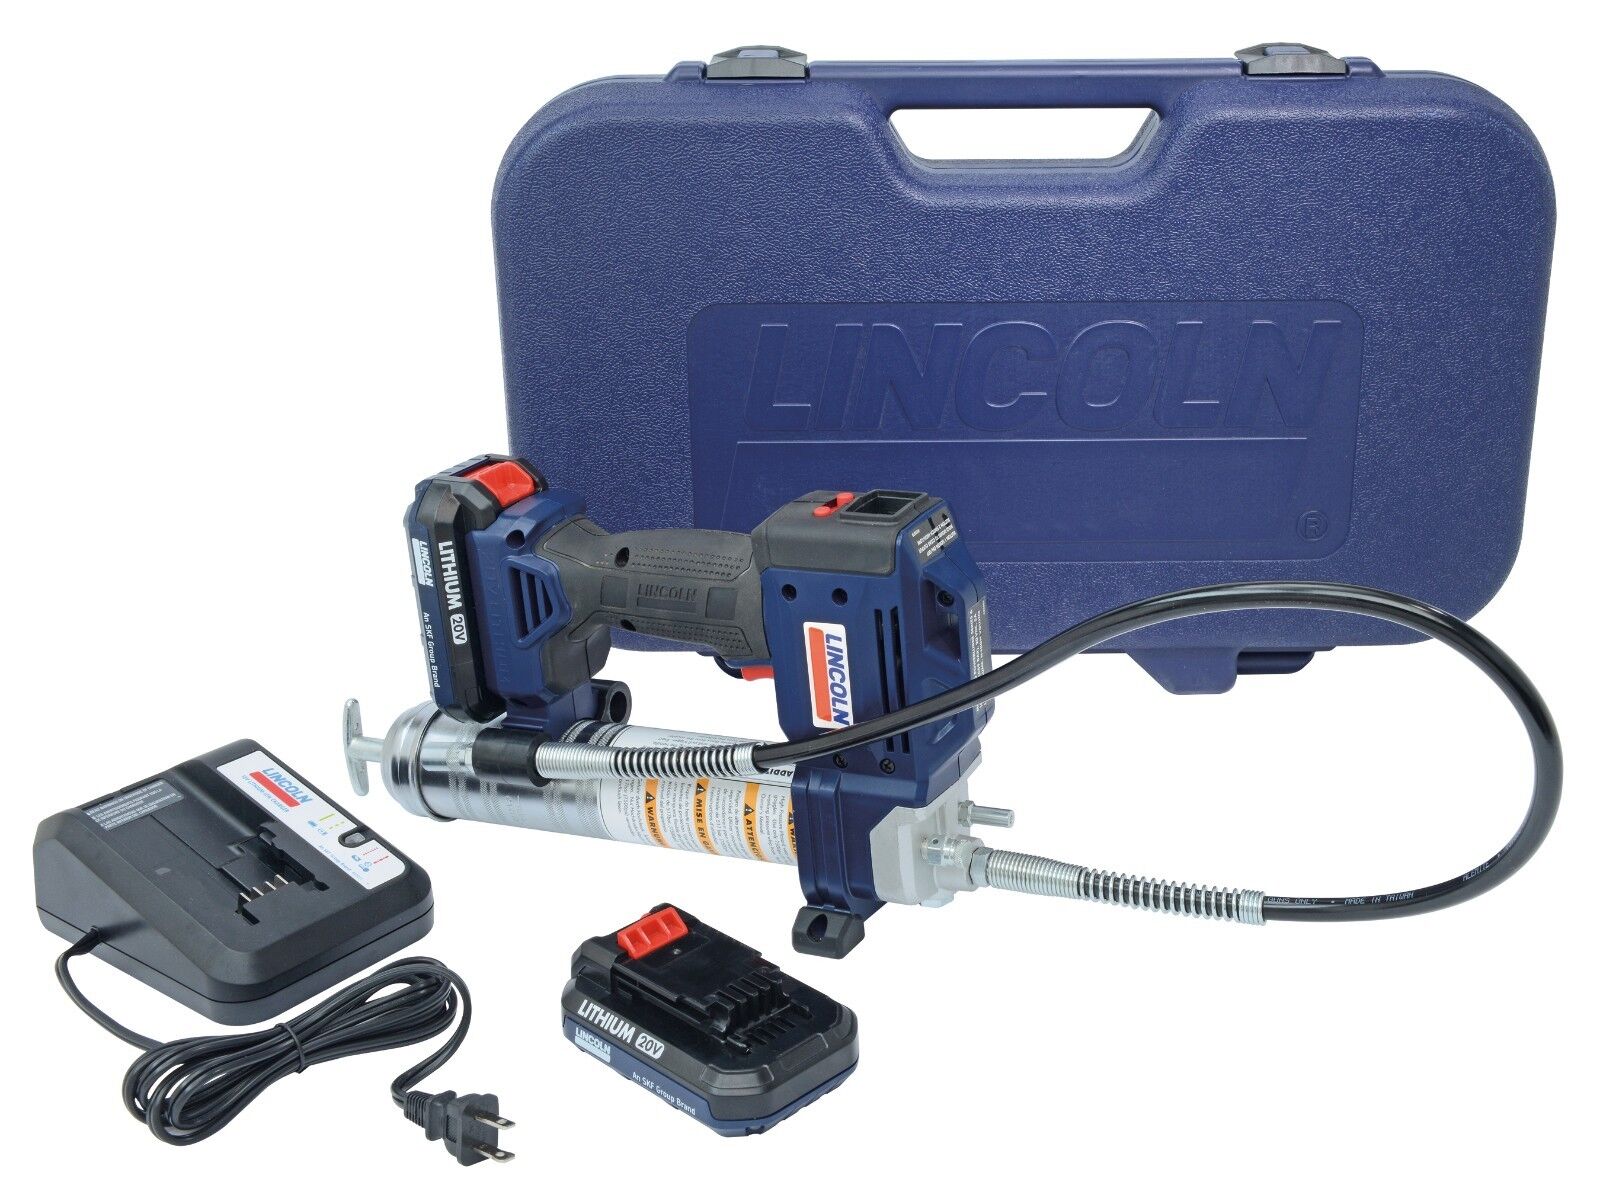 Lincoln 1884 PowerLuber 20V Lithium-Ion Battery Operated Grease